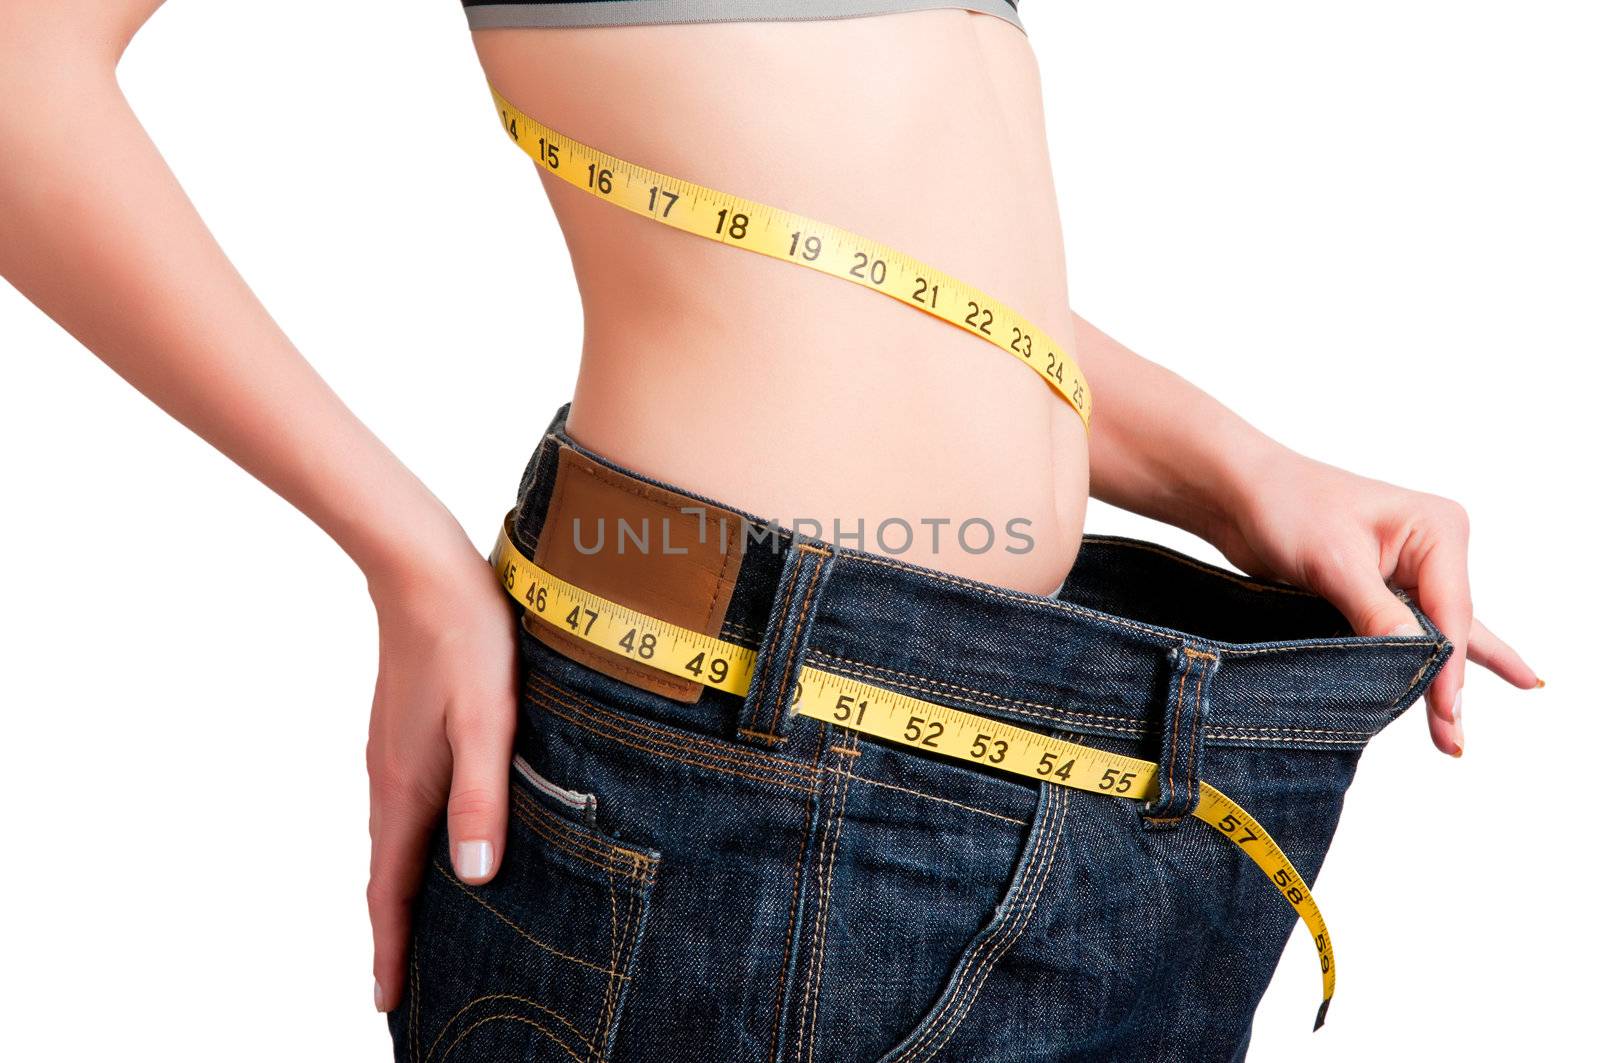 Woman seen how much weight she lost. Isolated background.